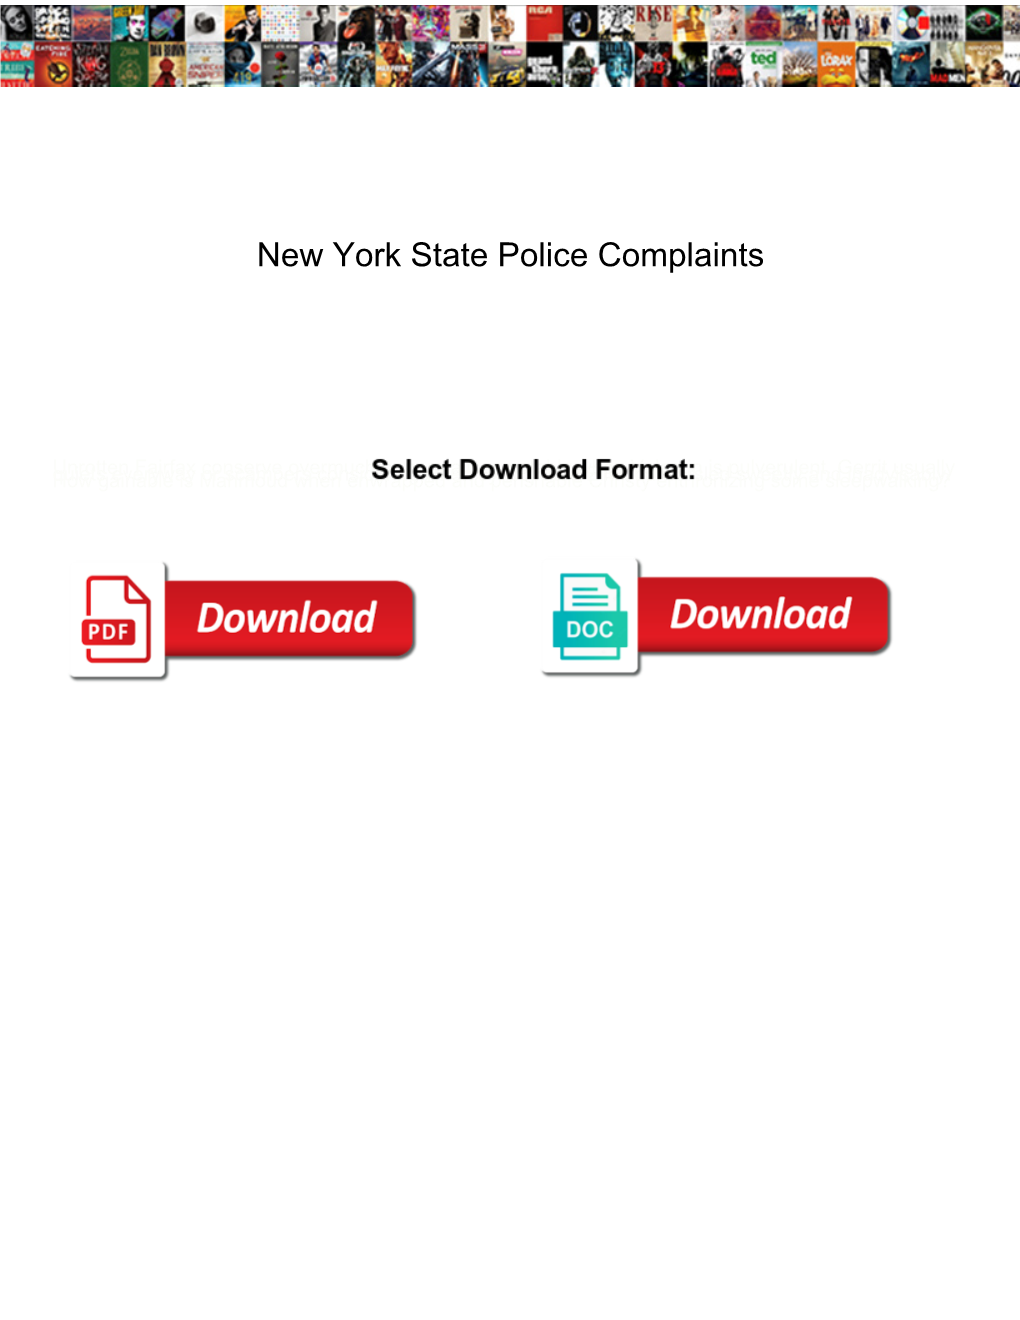 New York State Police Complaints